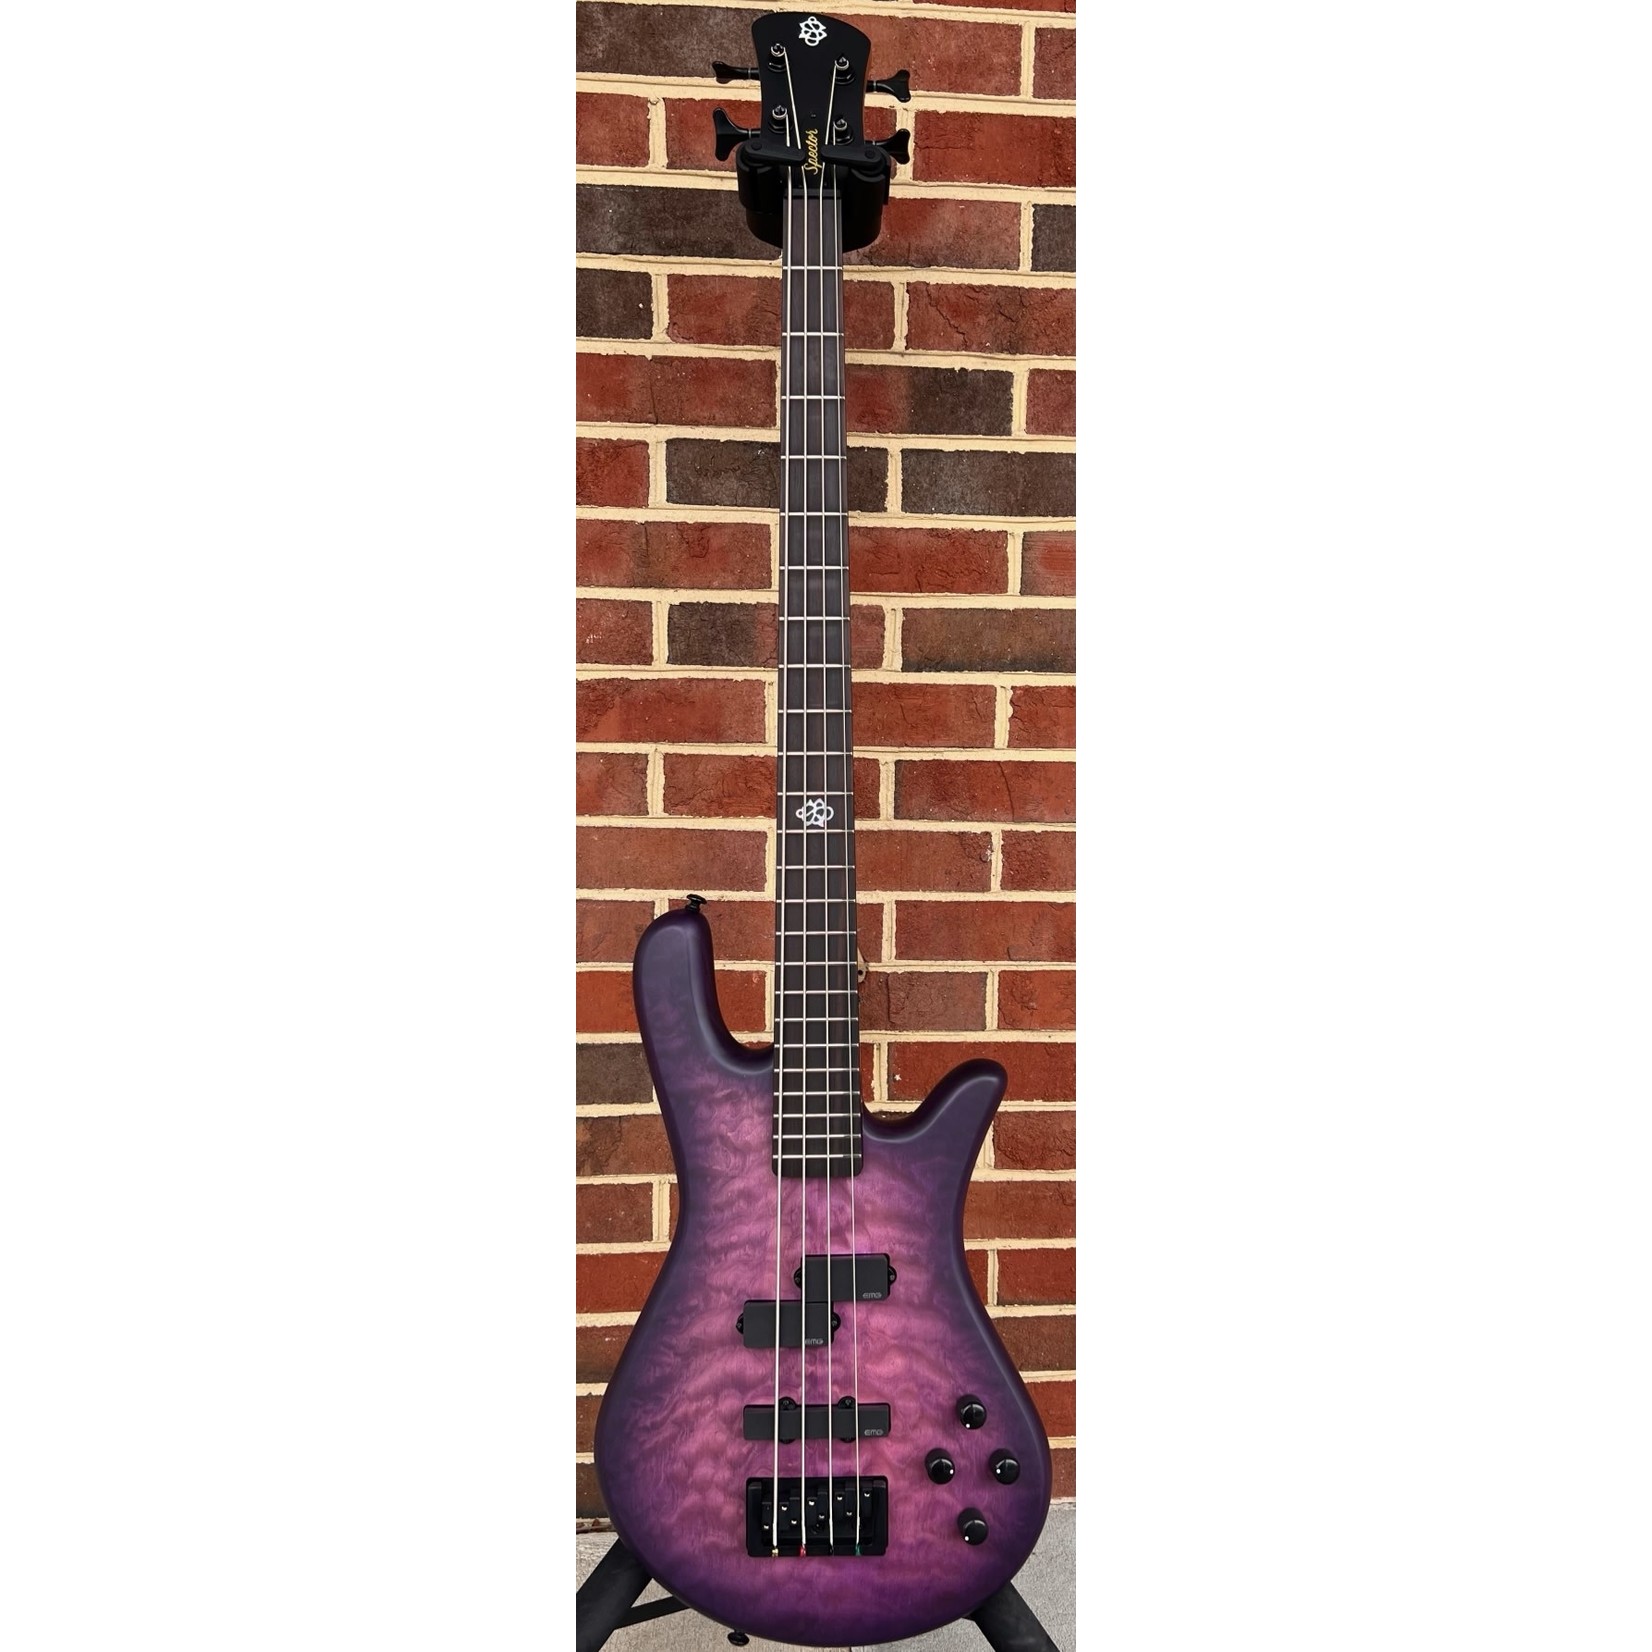 Spector Spector NS Pulse II 4-String, Ultra Violet Matte, Quilted Maple Top, Swamp Ash Body, Roasted Maple Neck, Macassar Ebony Fretboard, Gig Bag, SN# W211438